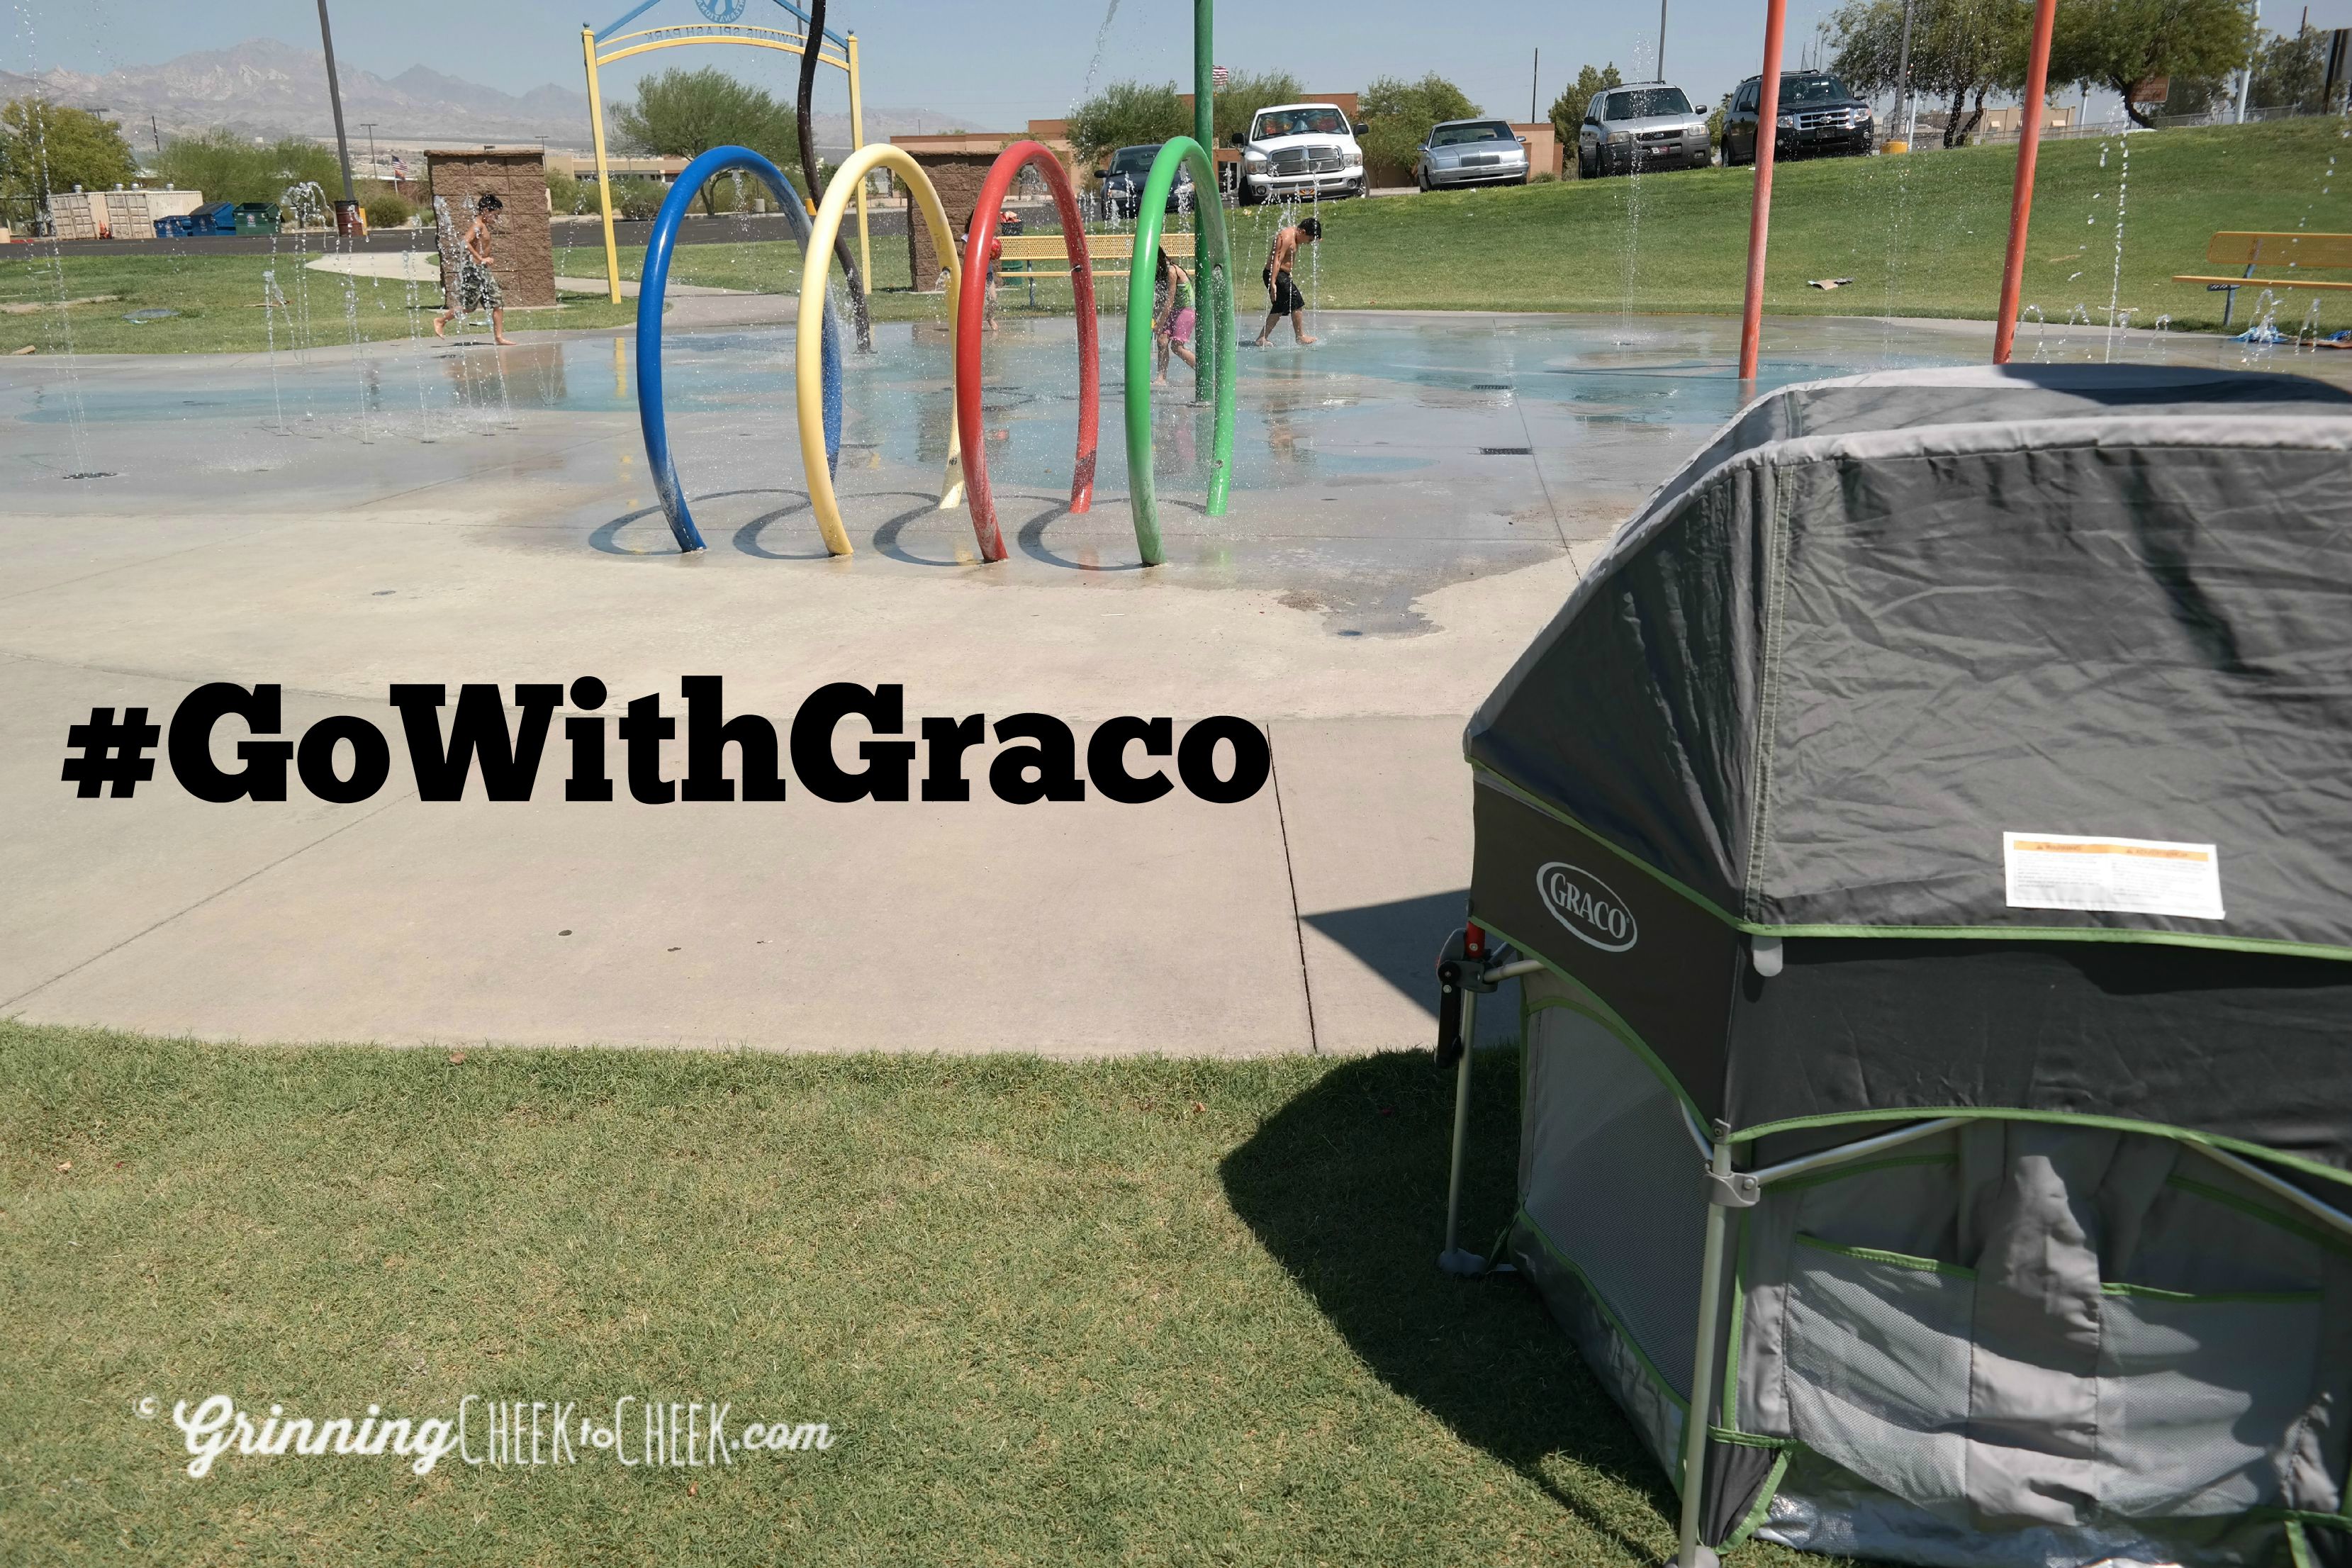 Win a Family Vacation – #GoWithGraco #Sweepstakes